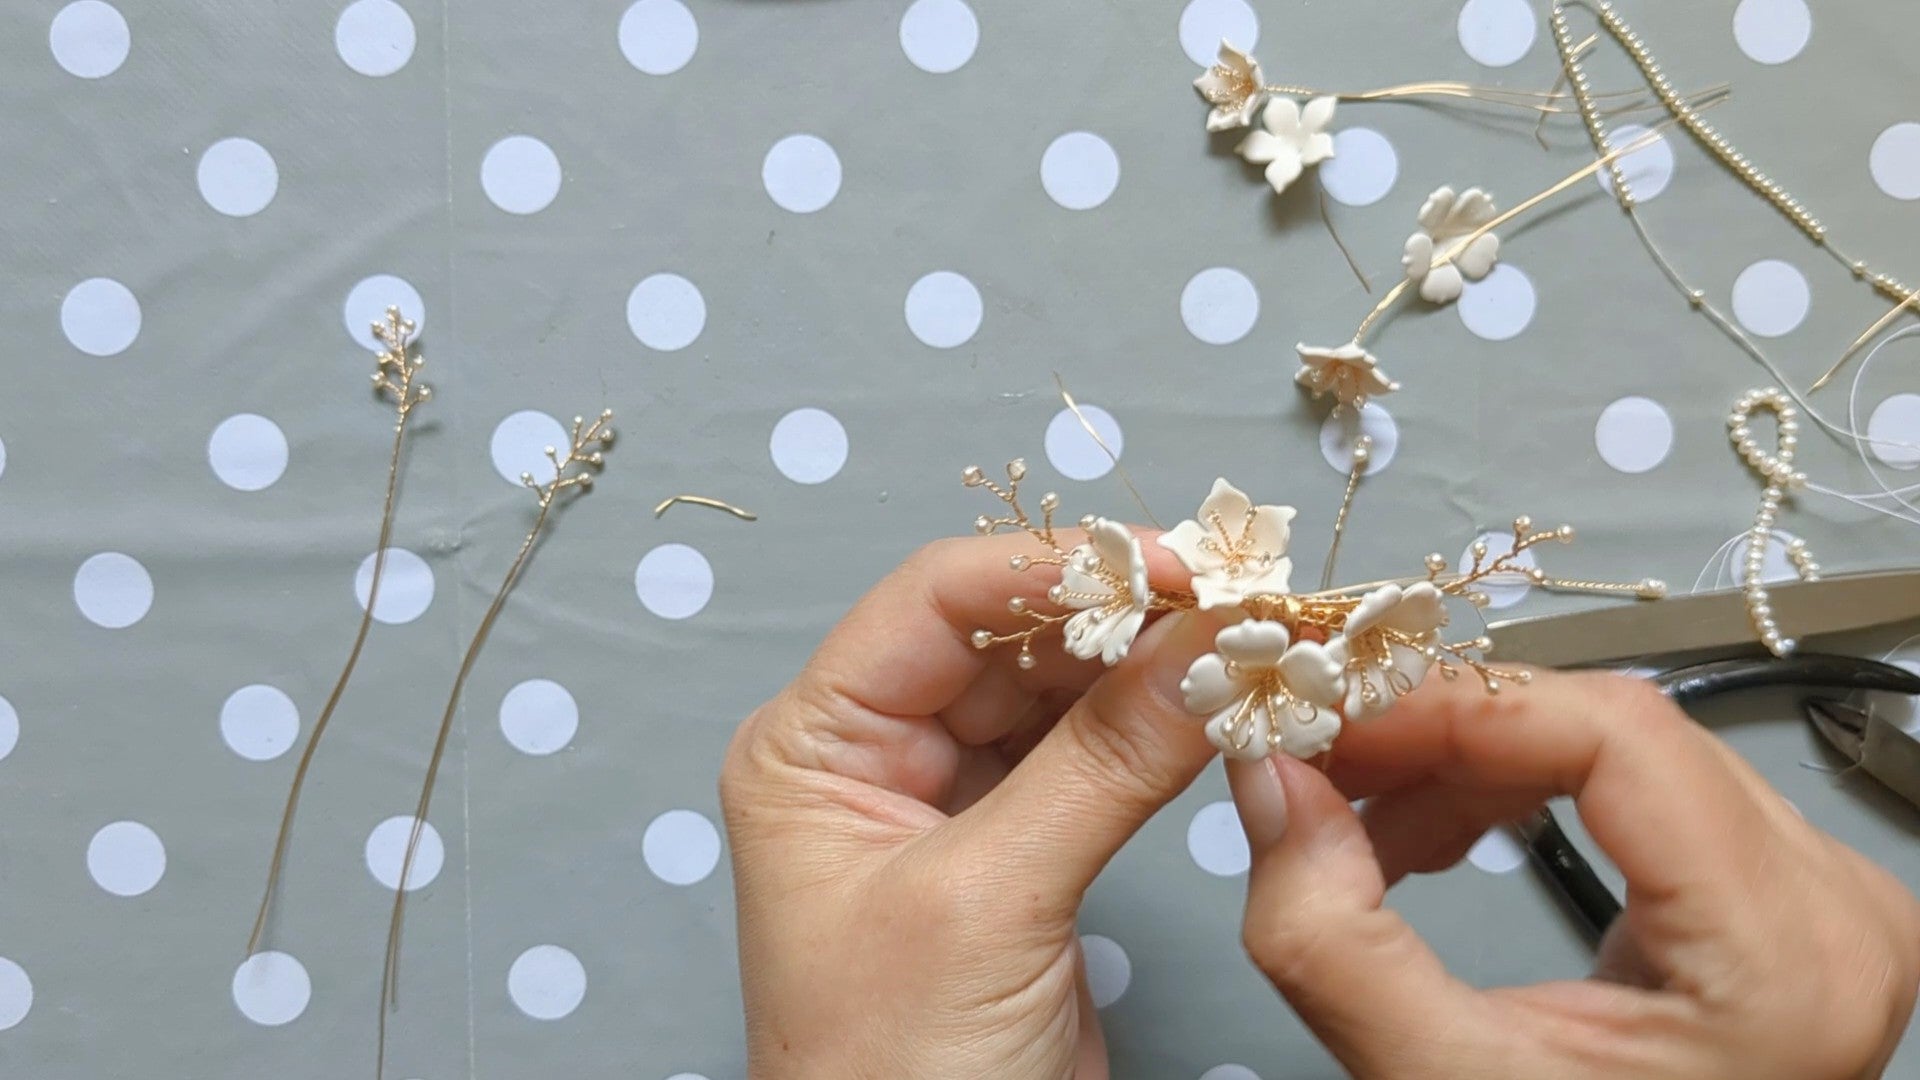 Load video: Watch how we make your bridal hair accessories